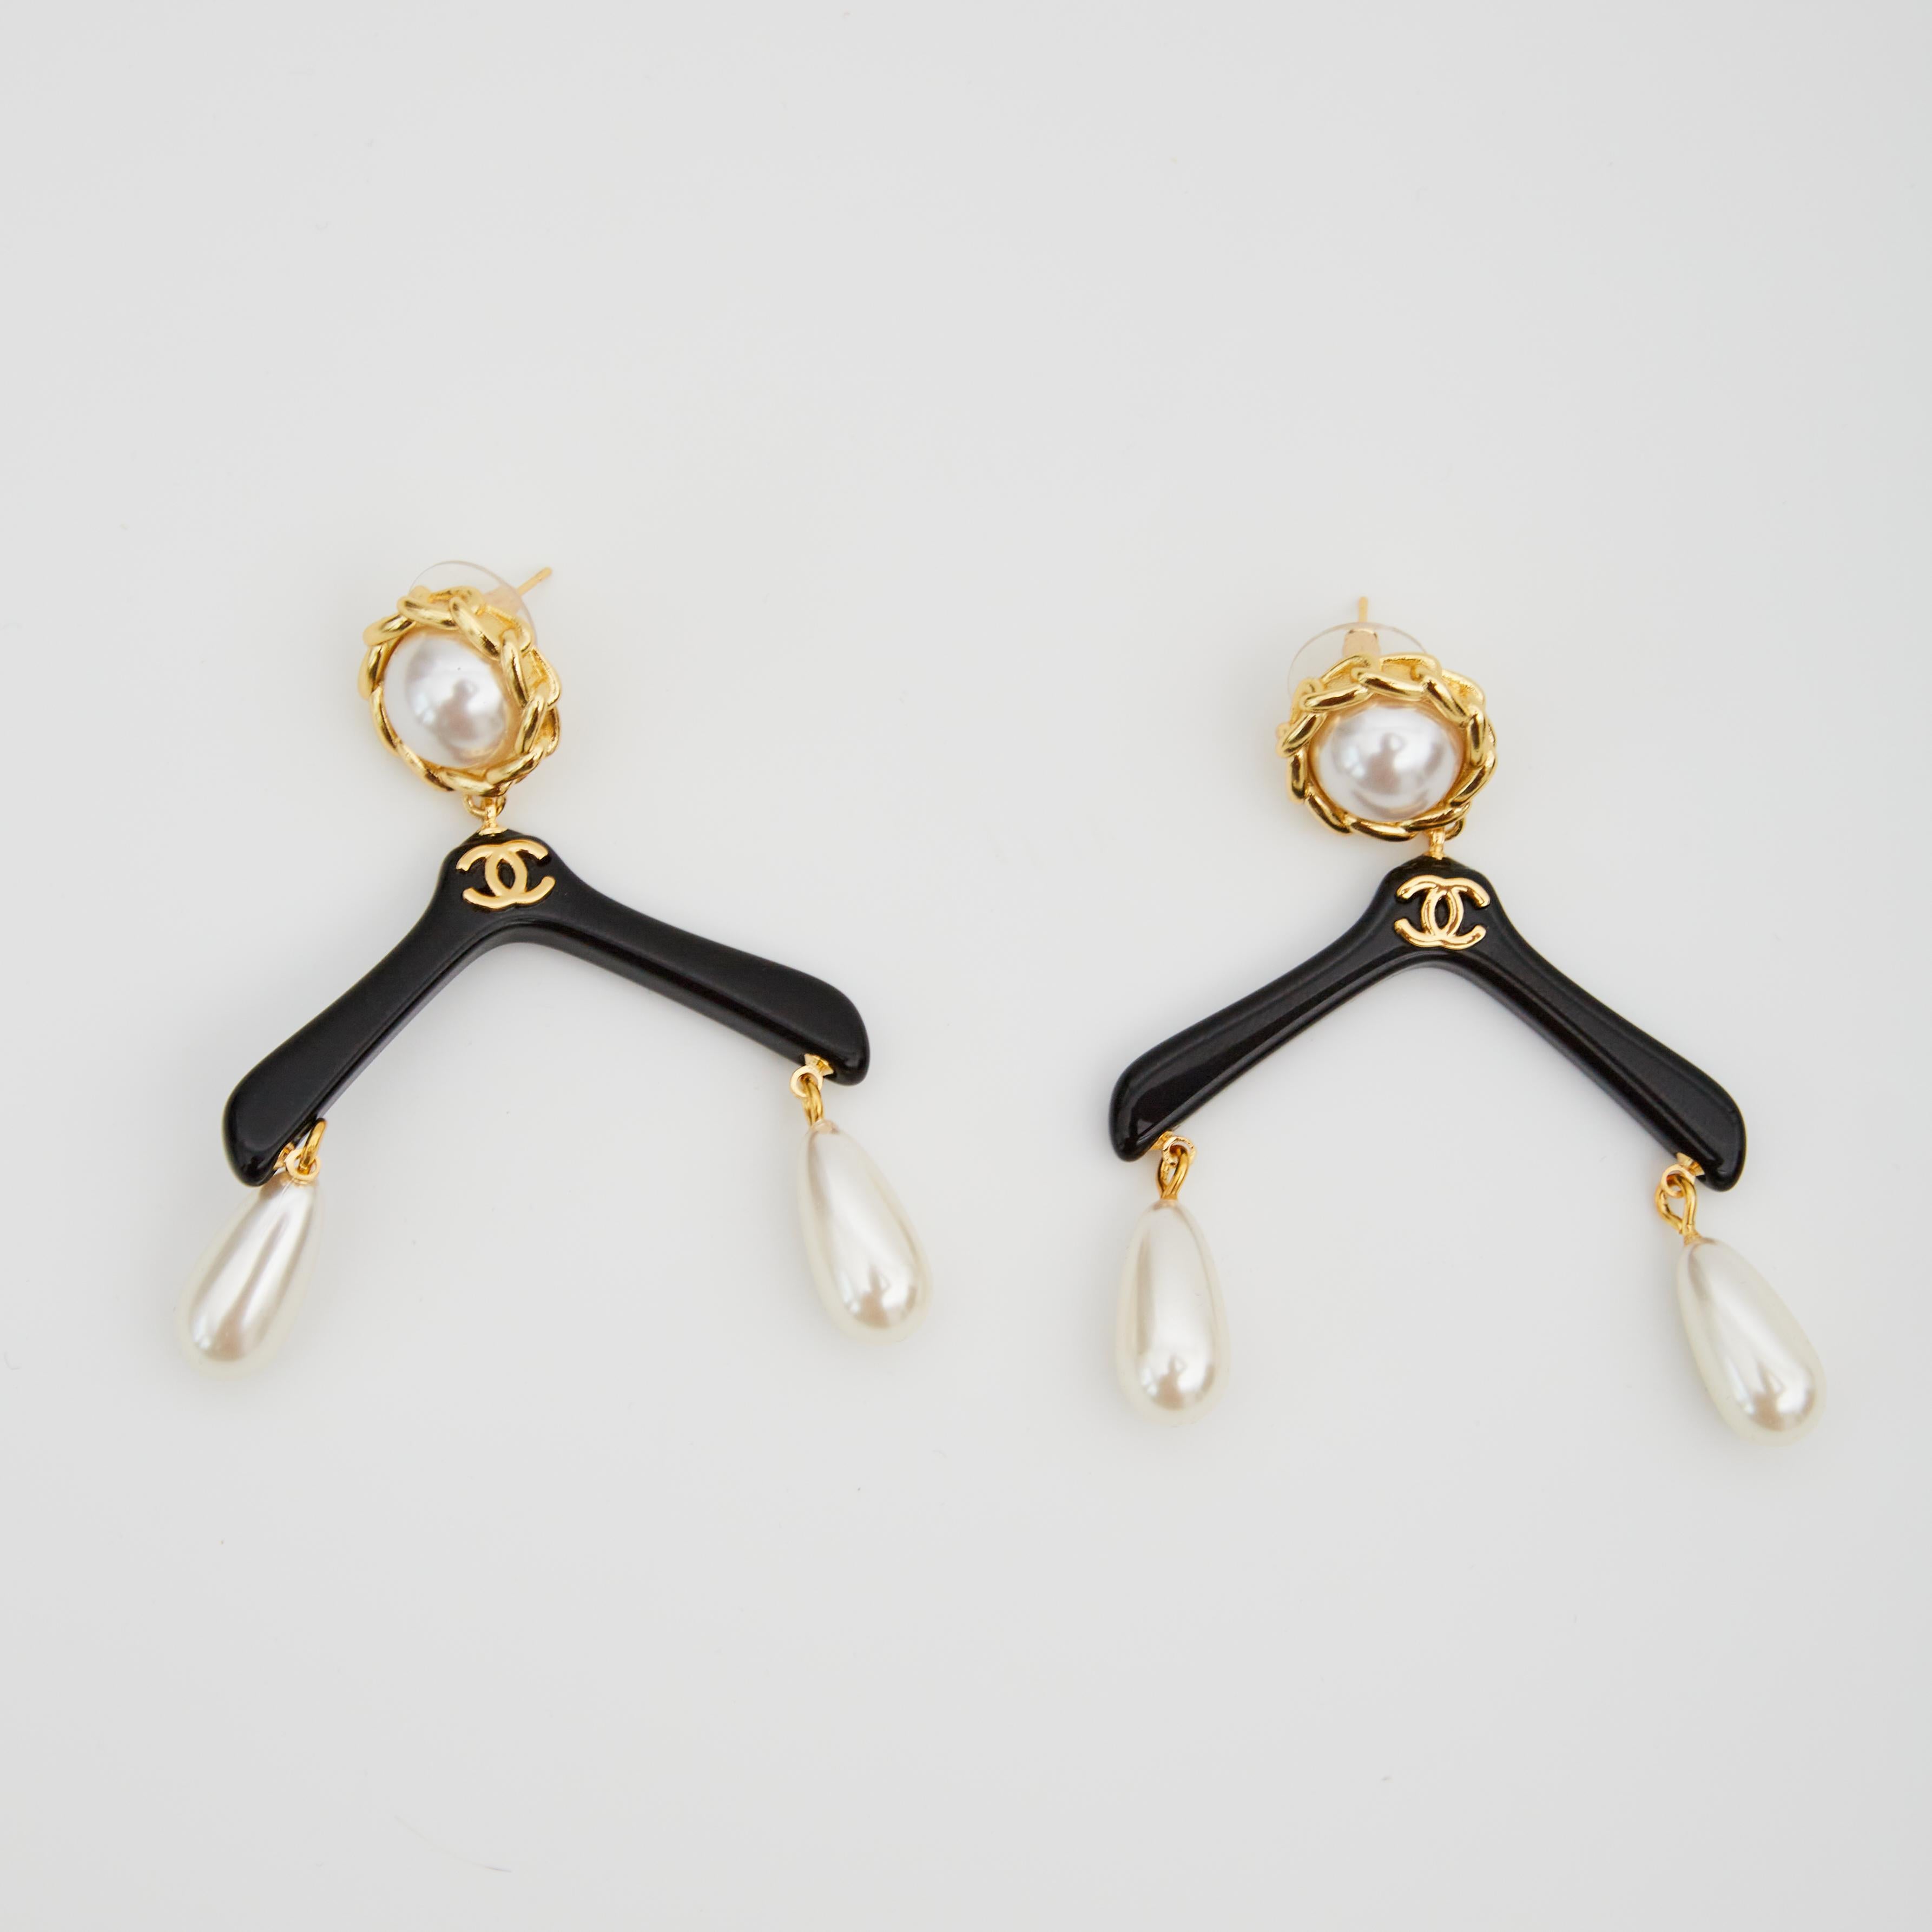 Chanel earrings fittings the shape of a coat hanged, pearl drops, CC logo and clip style attachment. 1980s

COLOR: Black and Gold
MATERIAL: Resin, faux pearl and brass
MARKINGS: A21 V
MEASURES: L 2.25” x L 2”
DROP: 2.25